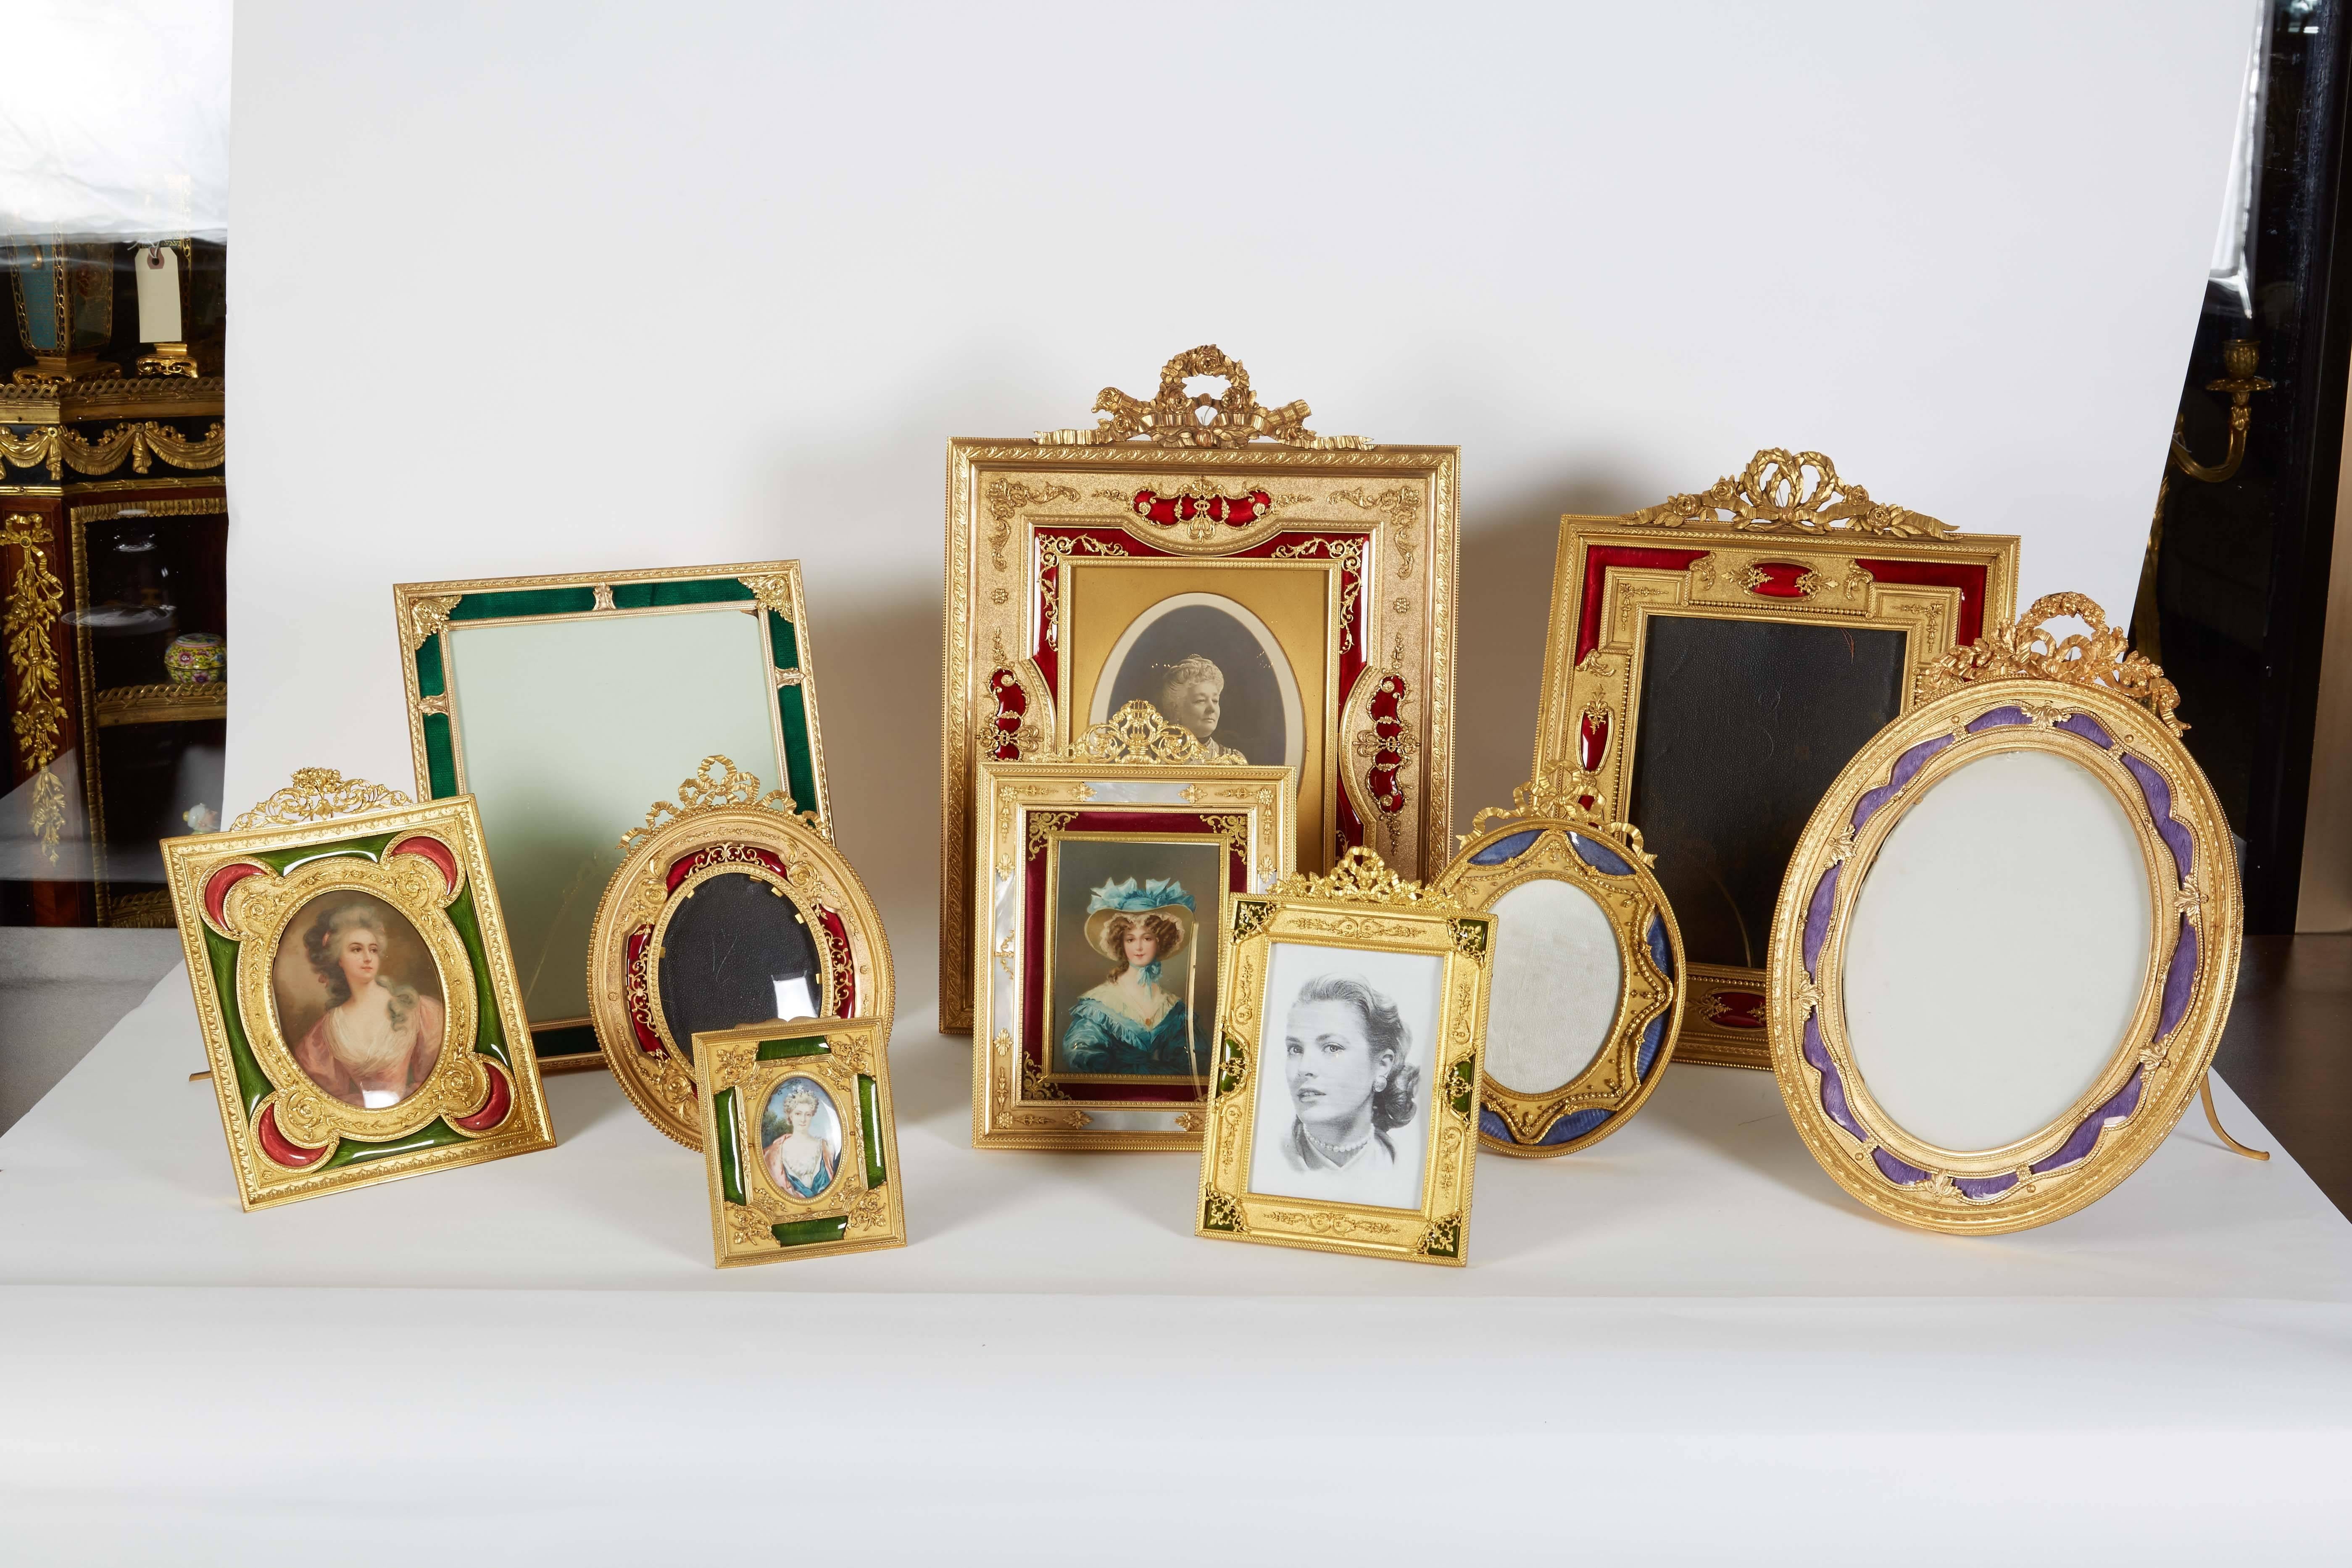 A French gilt bronze ormolu and purple Guilloche enamel picture photo frame, 19th century.

Frame size: 14.5 x 11 inches.
Photo size: 9.5 x 7 inches.